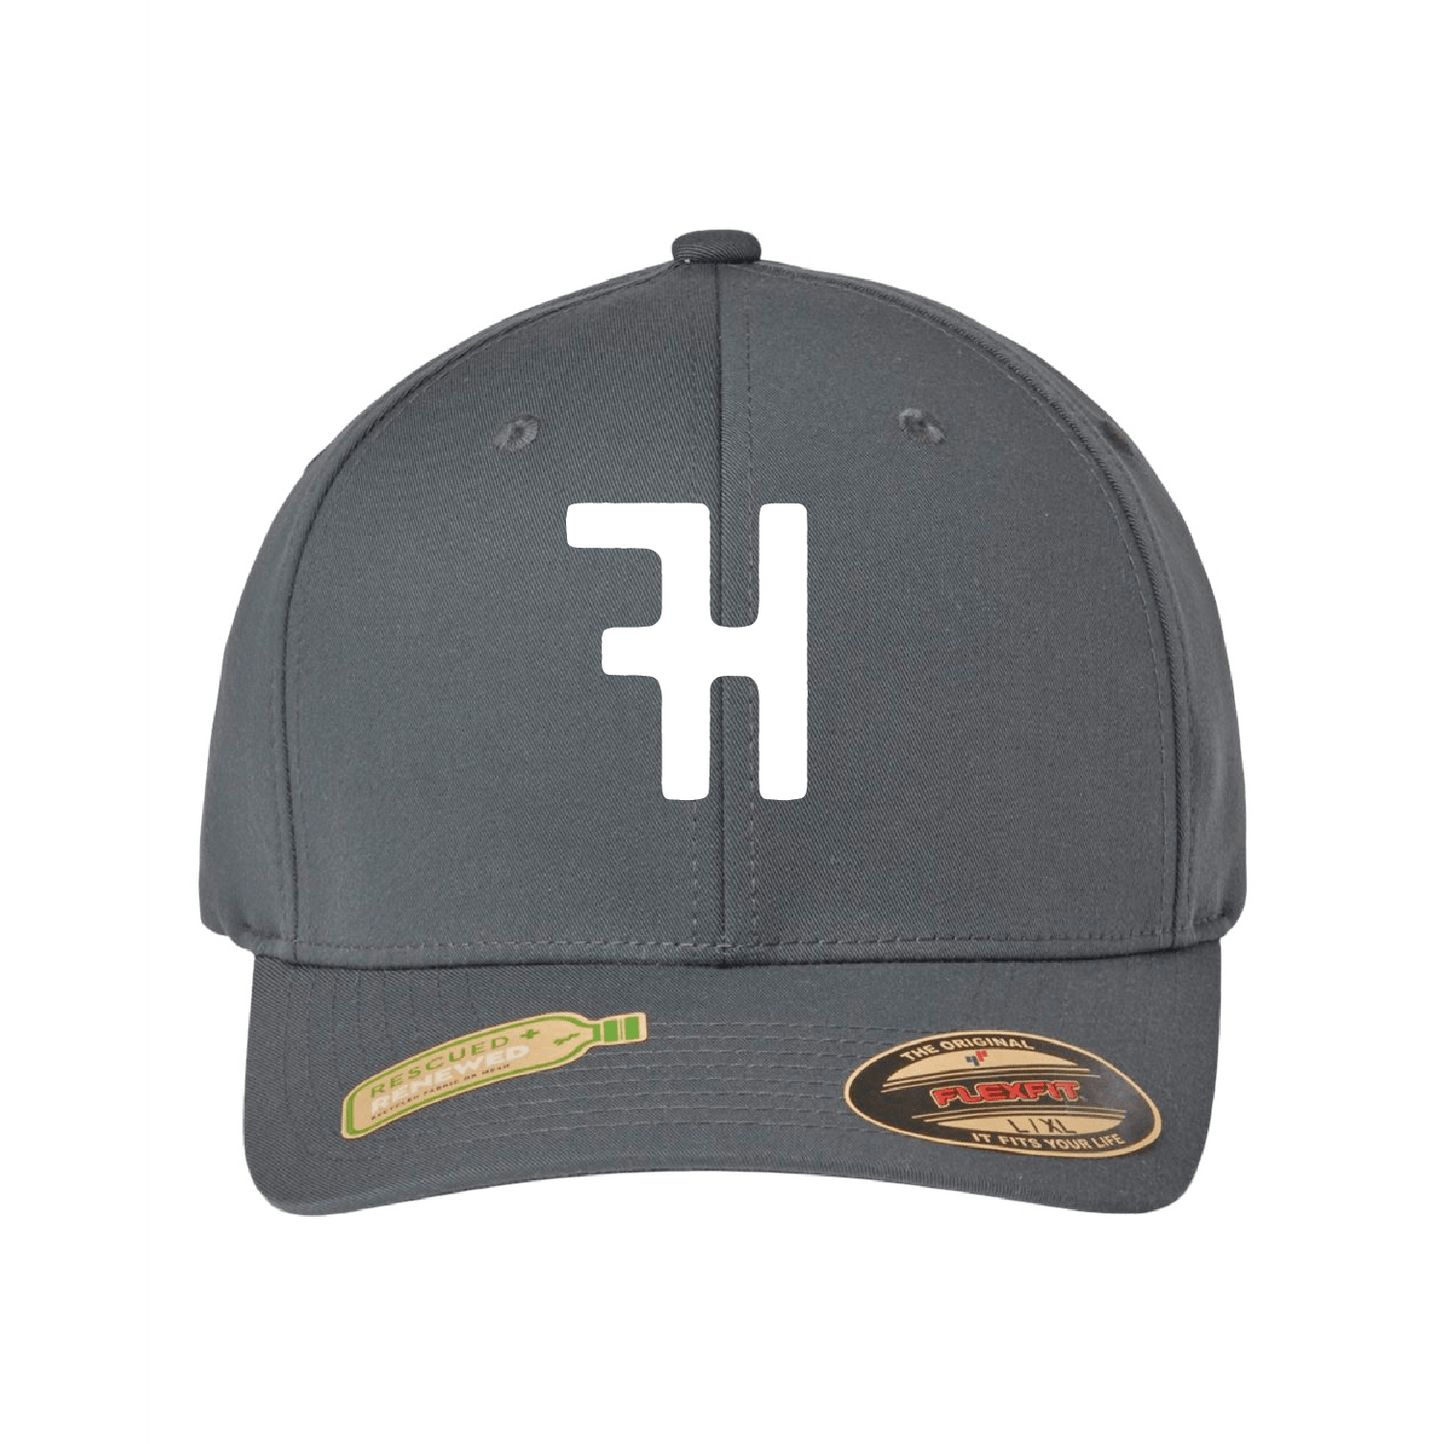 Farmhouse Crossfit Sustainable Polyester Cap